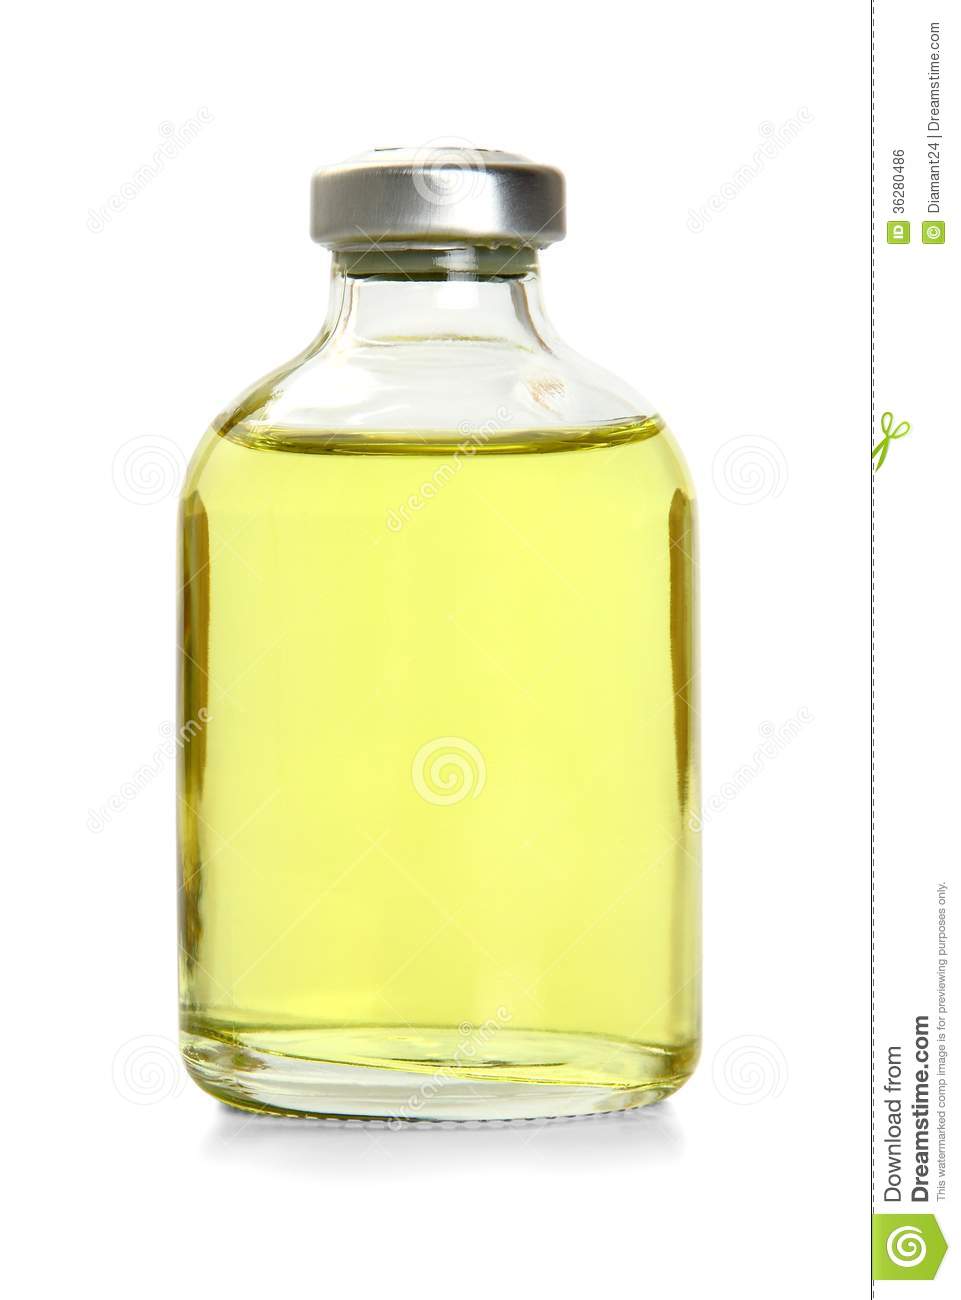 One Yellow Bottle With Essential Oil Royalty Free Stock Image   Image